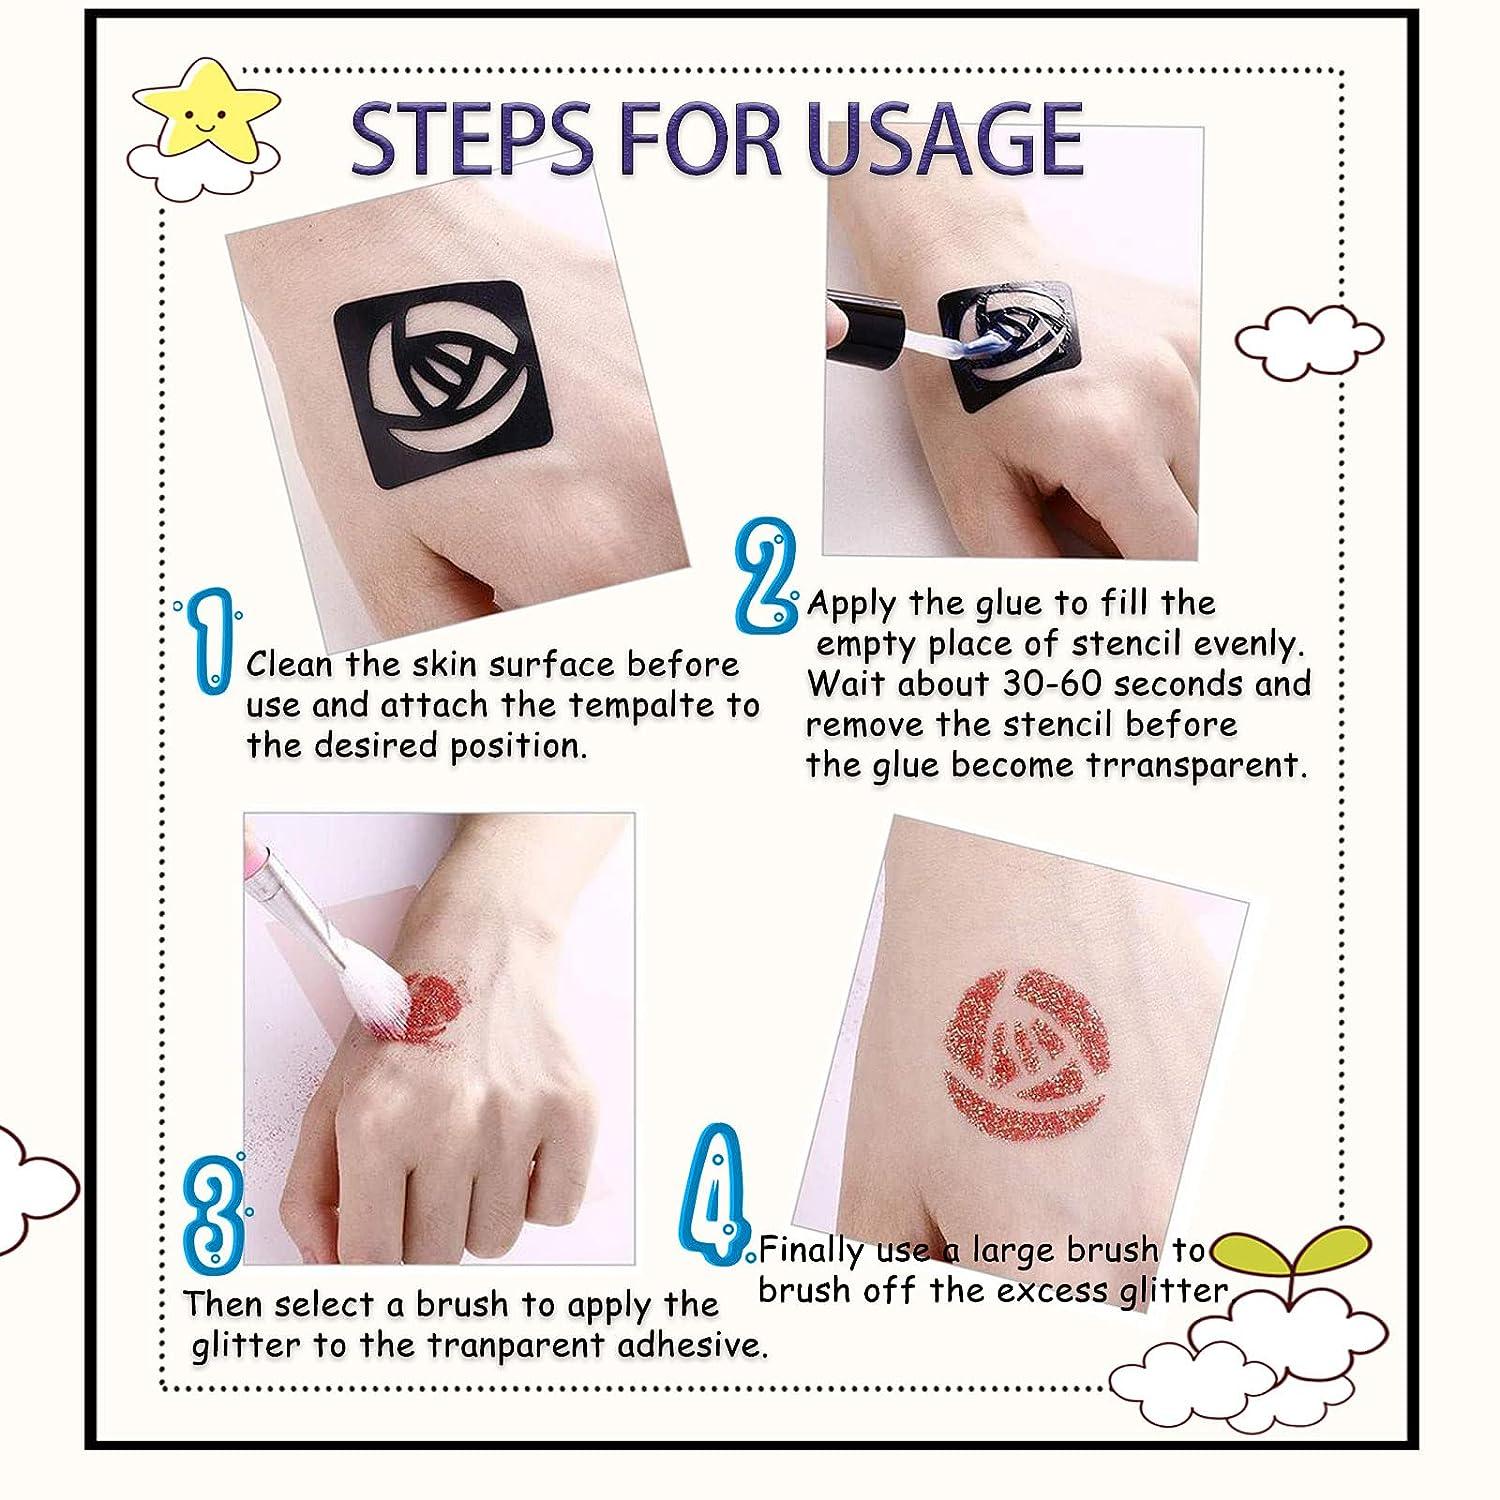 DIY TEMPORARY TATTOOS AT HOME - Fake Tattoos That Look Real - Easy and  Waterproof - YouTube